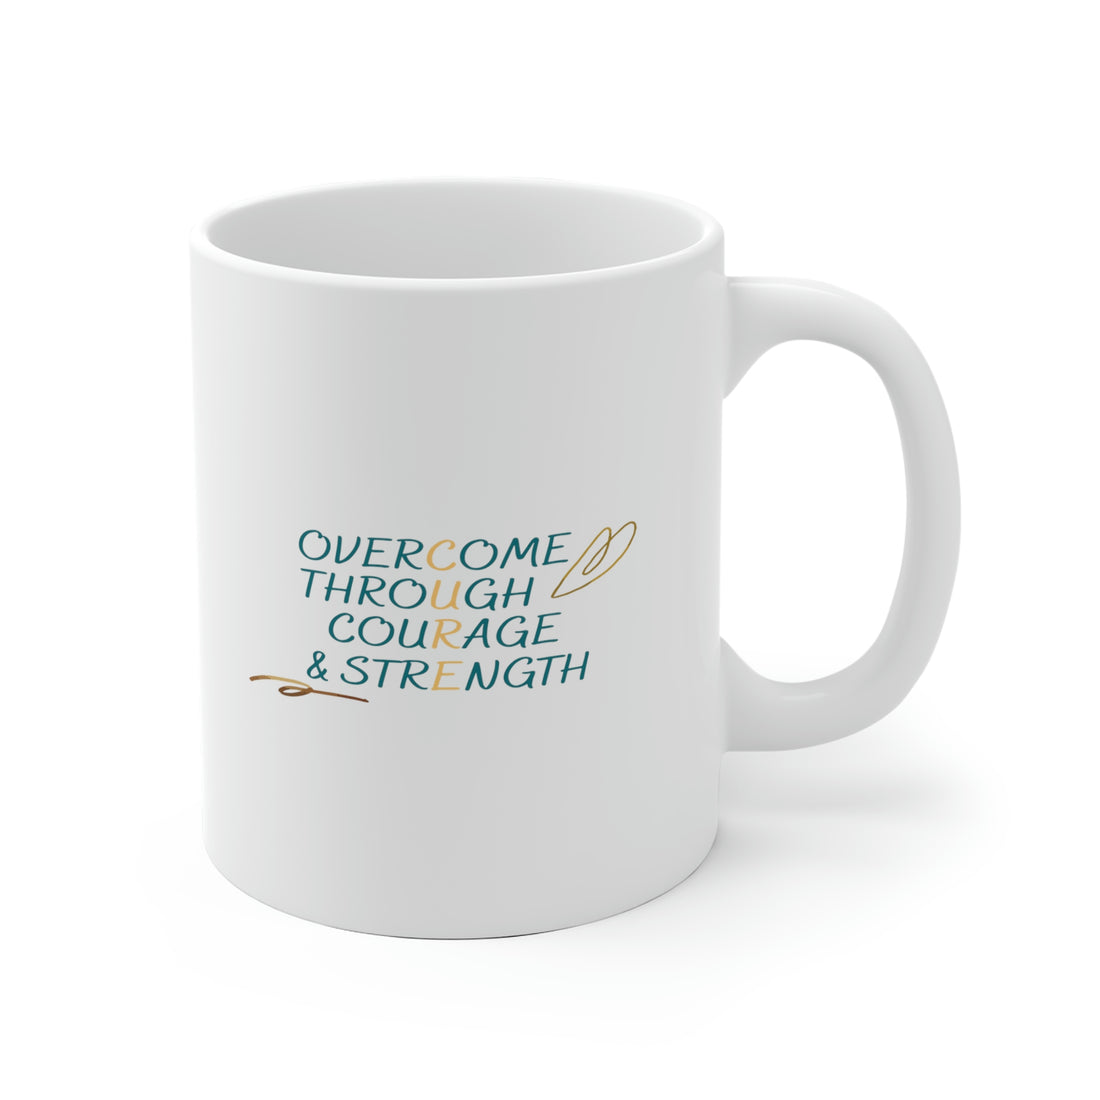 Overcome Through Courage and Strength - White Ceramic Mug 2 sizes Available